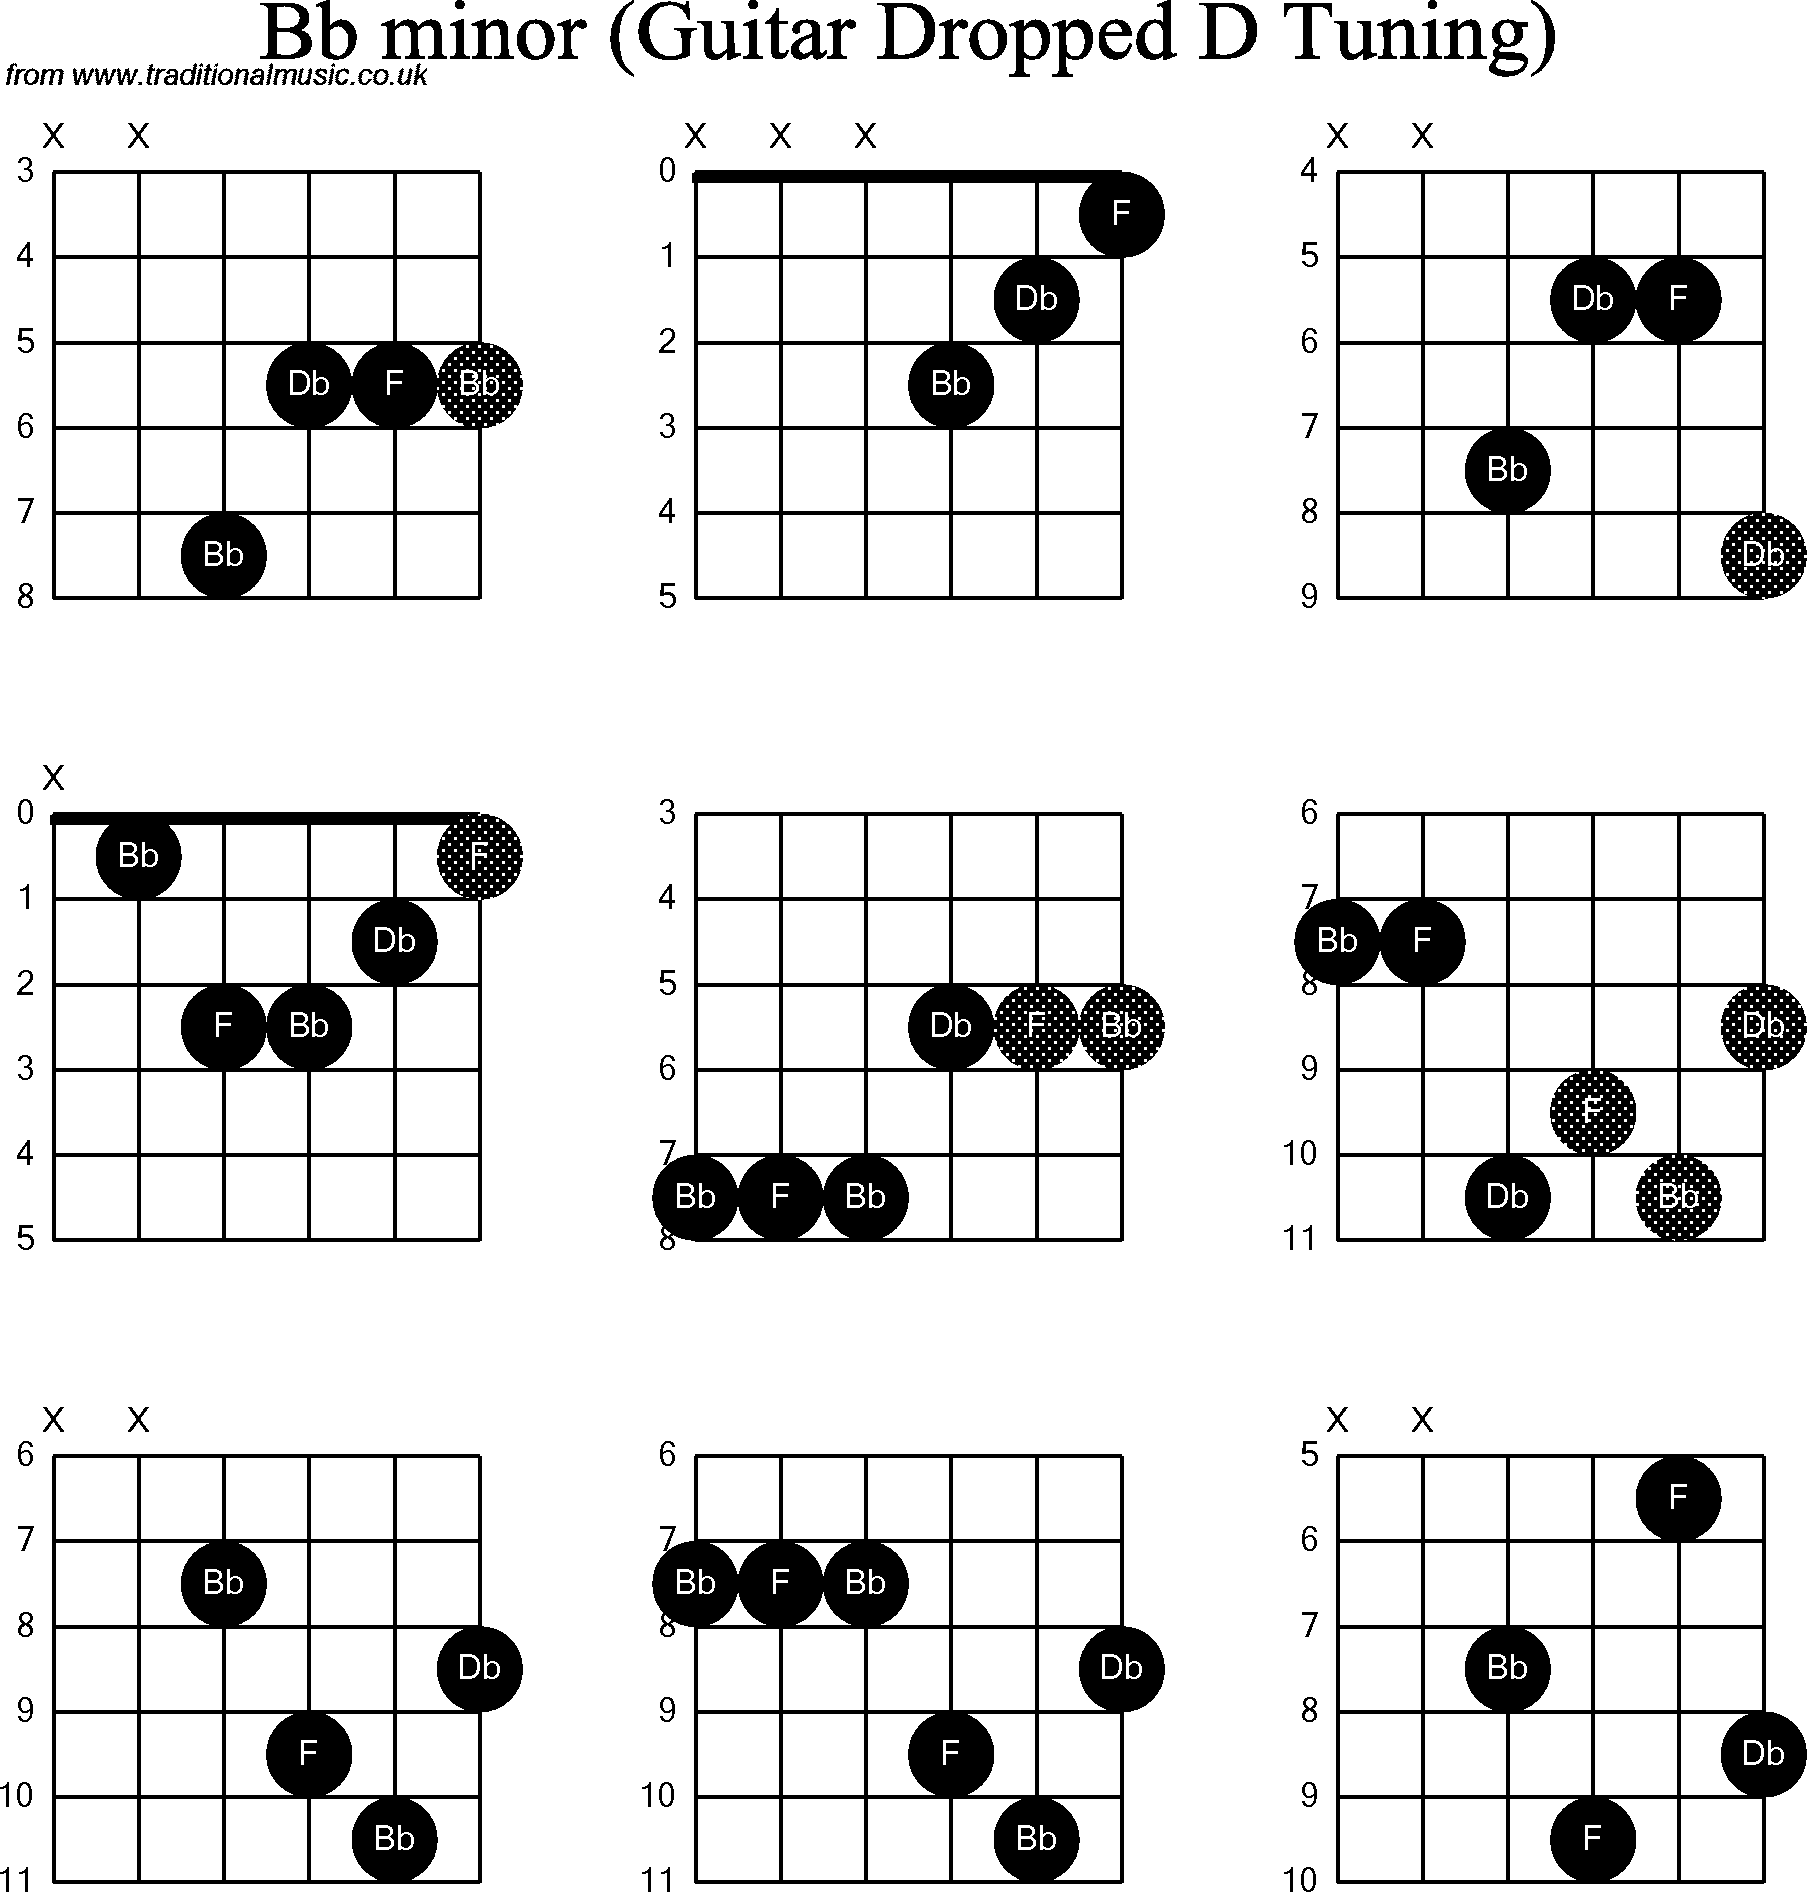 Chord diagrams for dropped D Guitar(DADGBE), Bb Minor